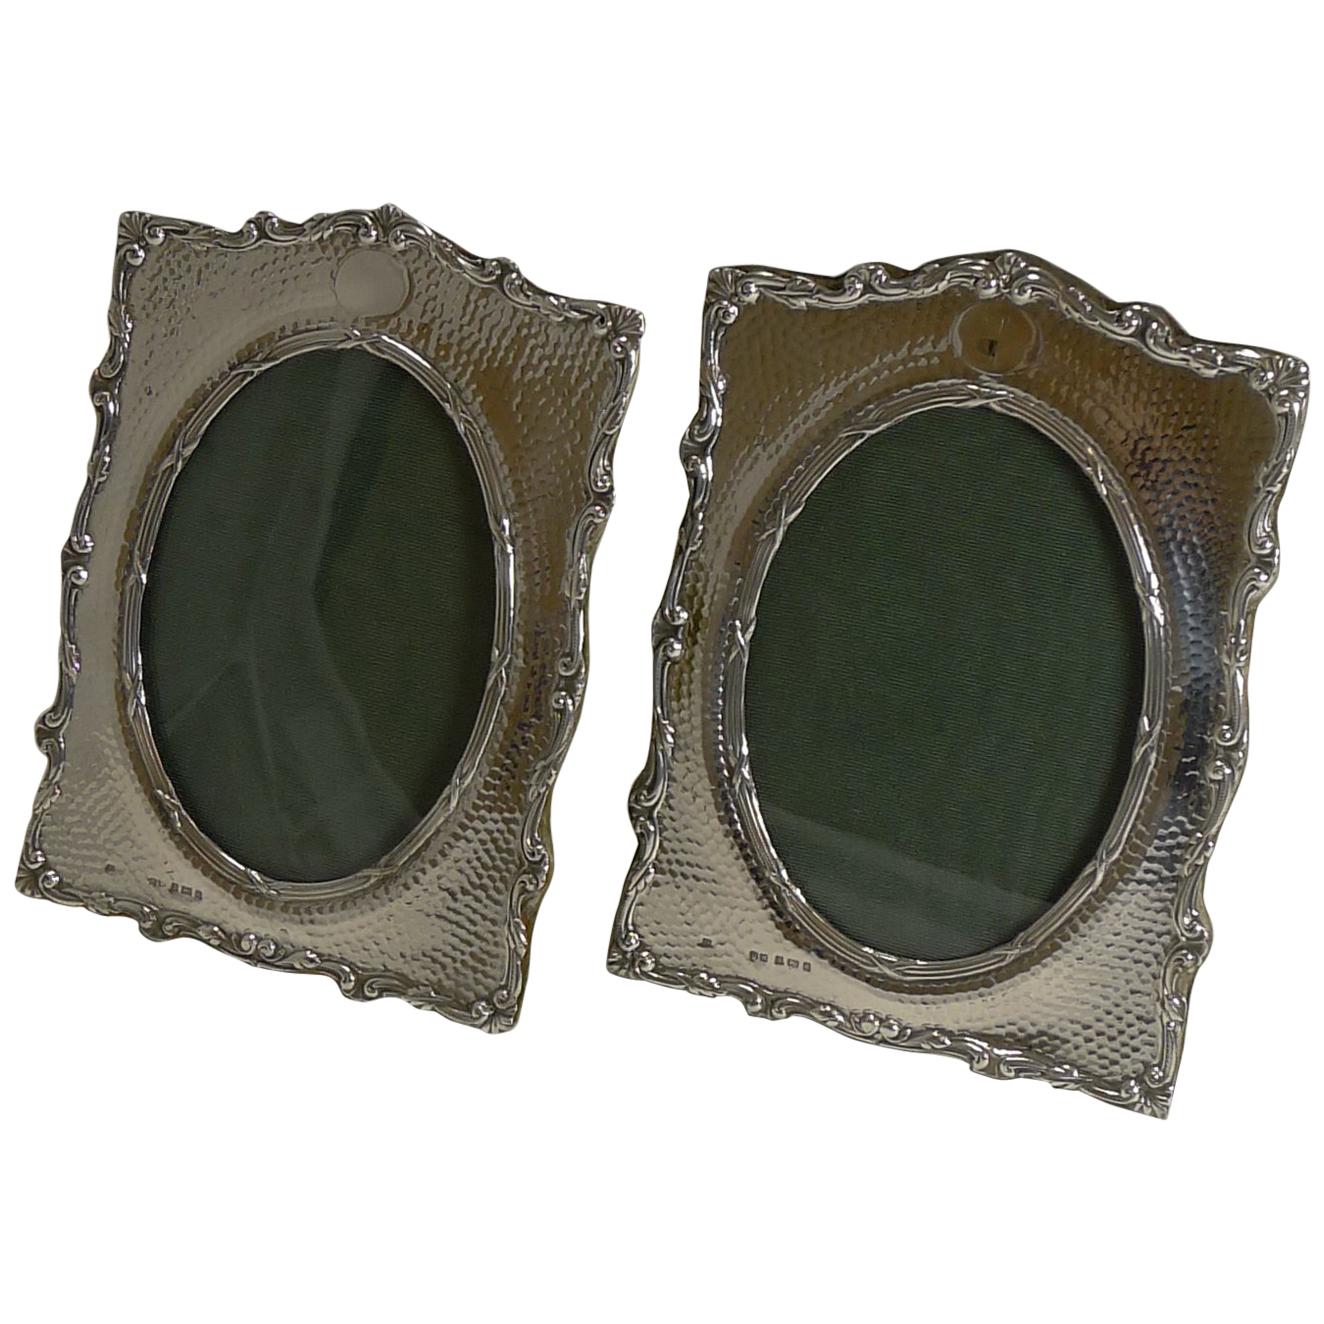 Pair of Antique English Sterling Silver Photograph Frames by Henry Matthews